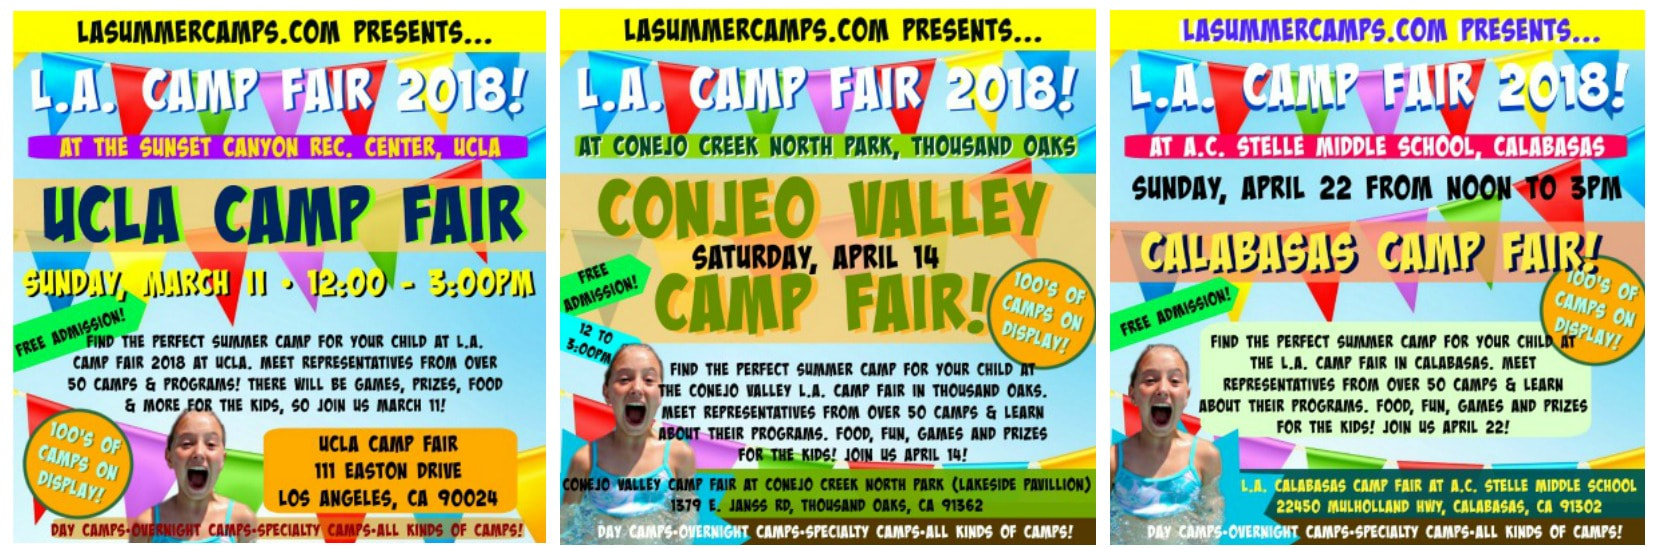 Three connected images, each promoting one of L.A. Camp Fair's event locations on Sunday, March 11 at UCLA, Saturday, April 14 in the Conejo Valley and Sunday, April 22 in Calabasas.